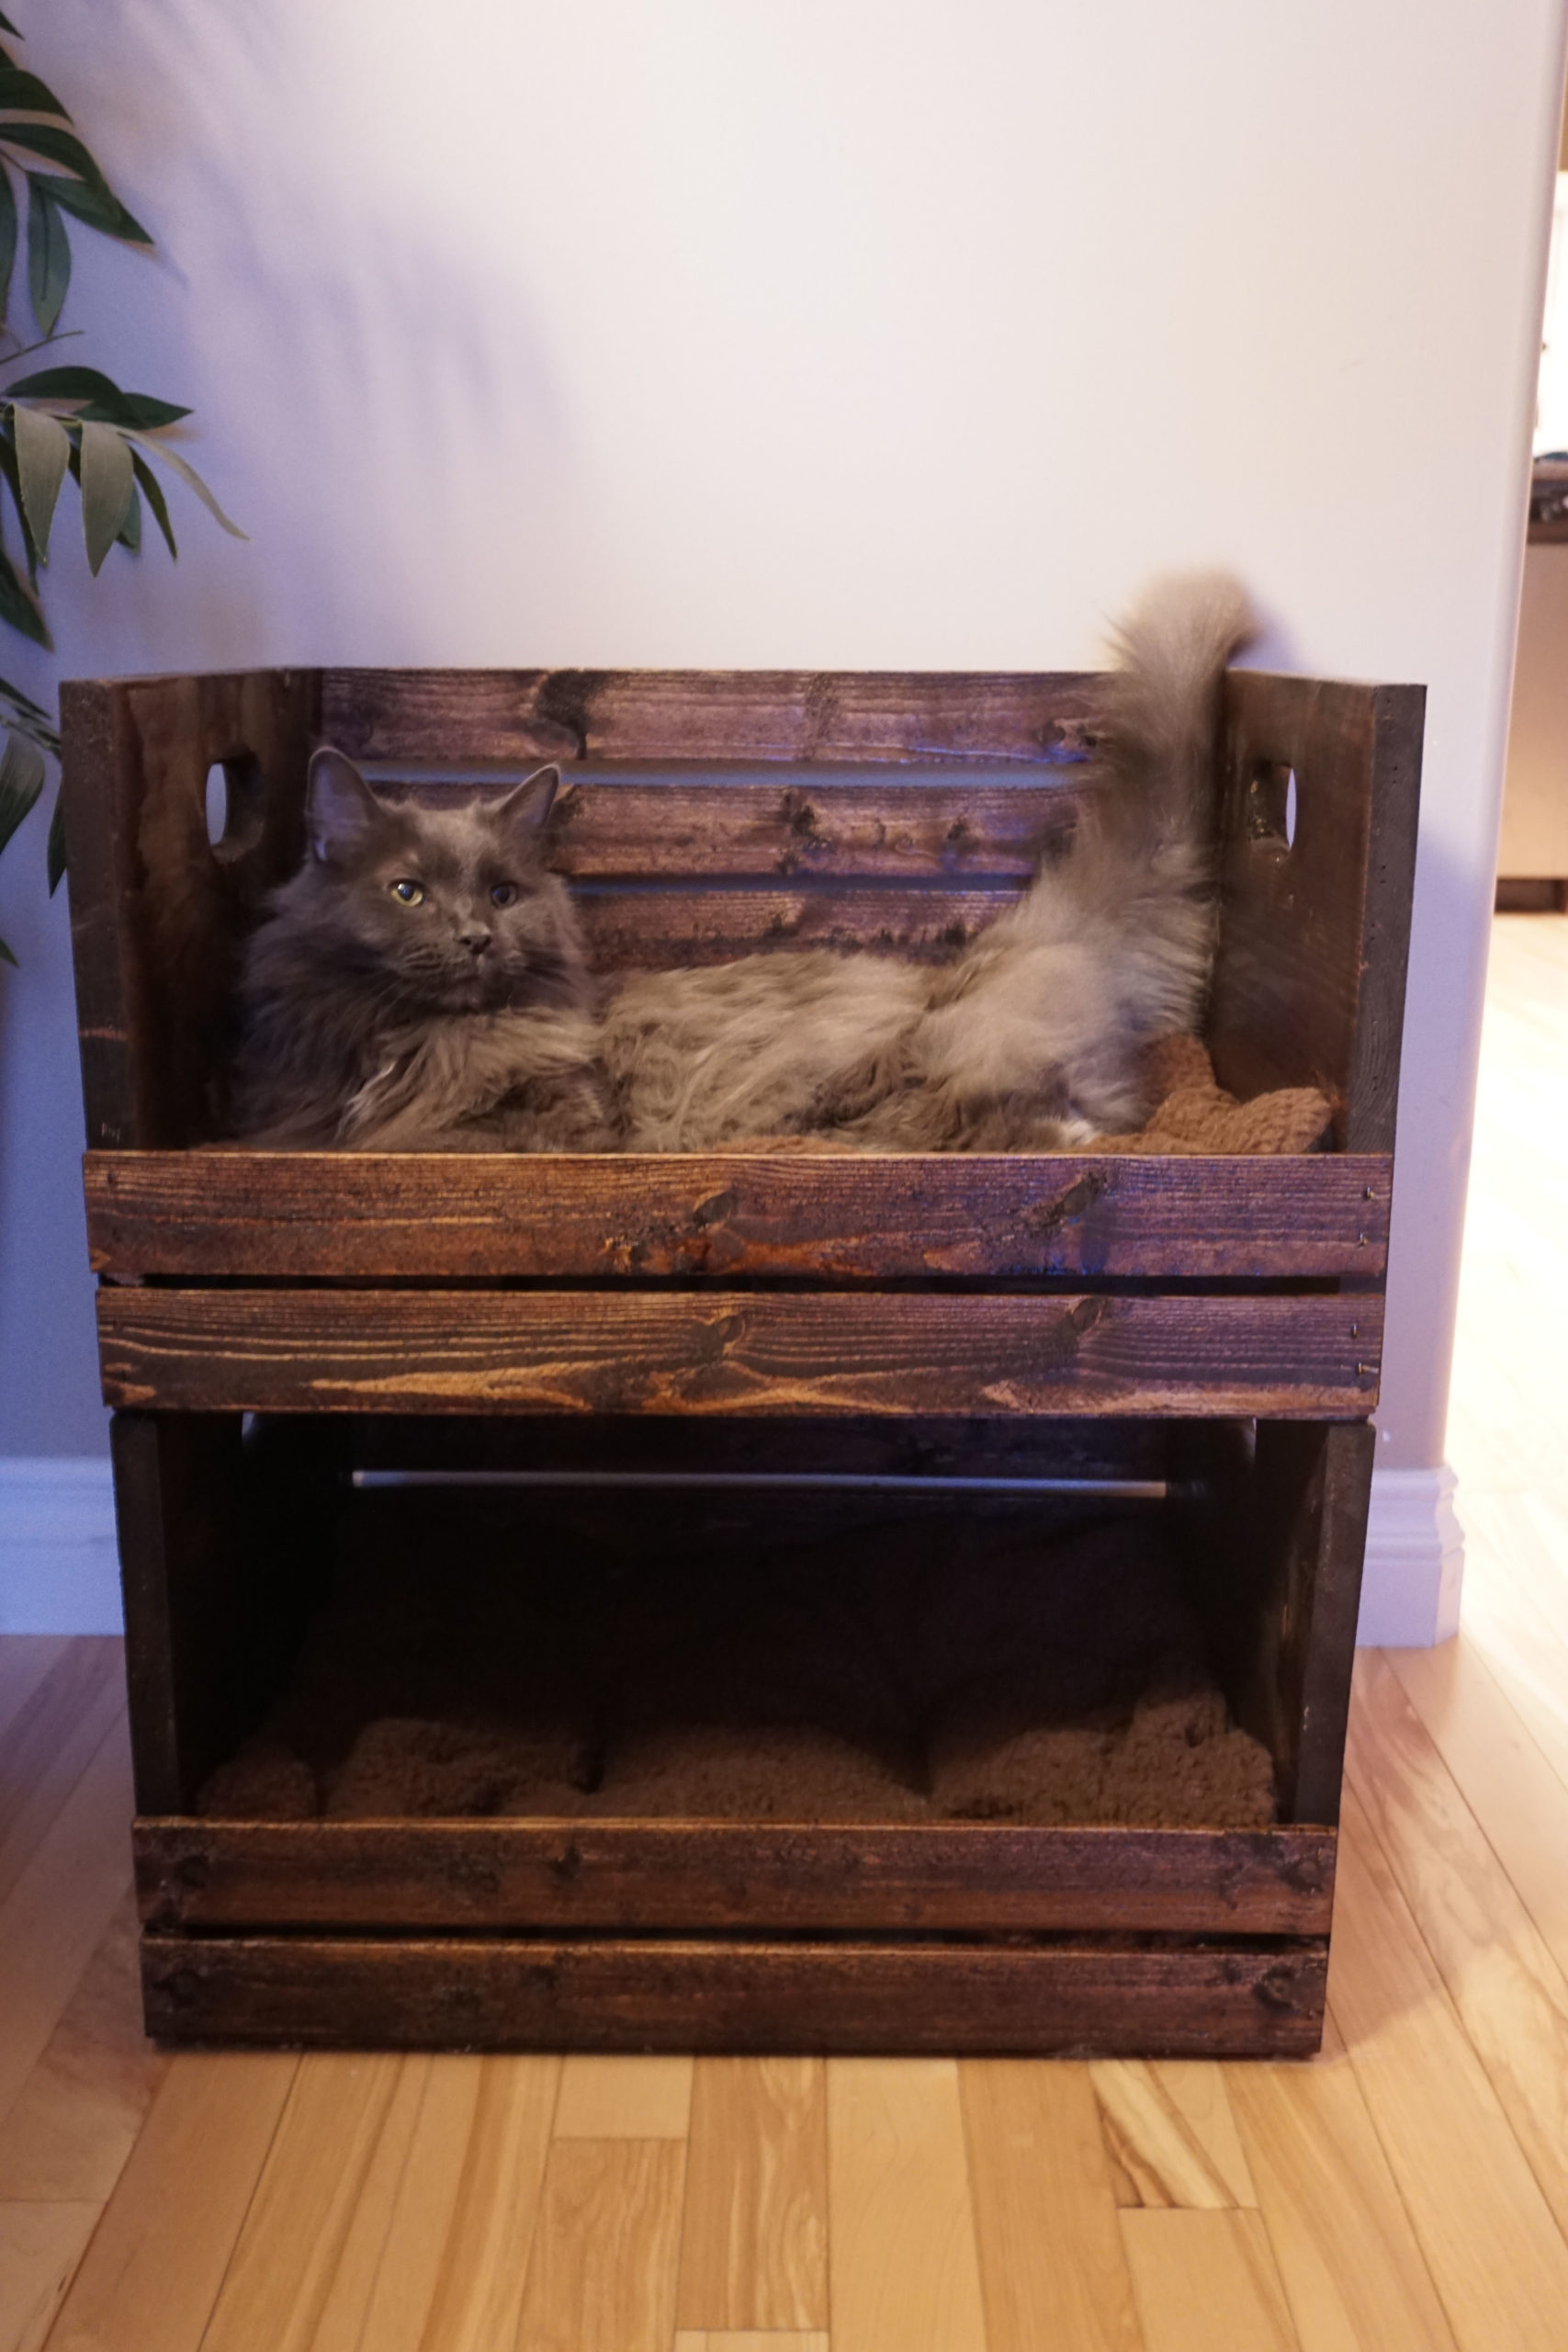 Build Cat Bunk Beds Out Of Crates, Kitten Bunk Beds